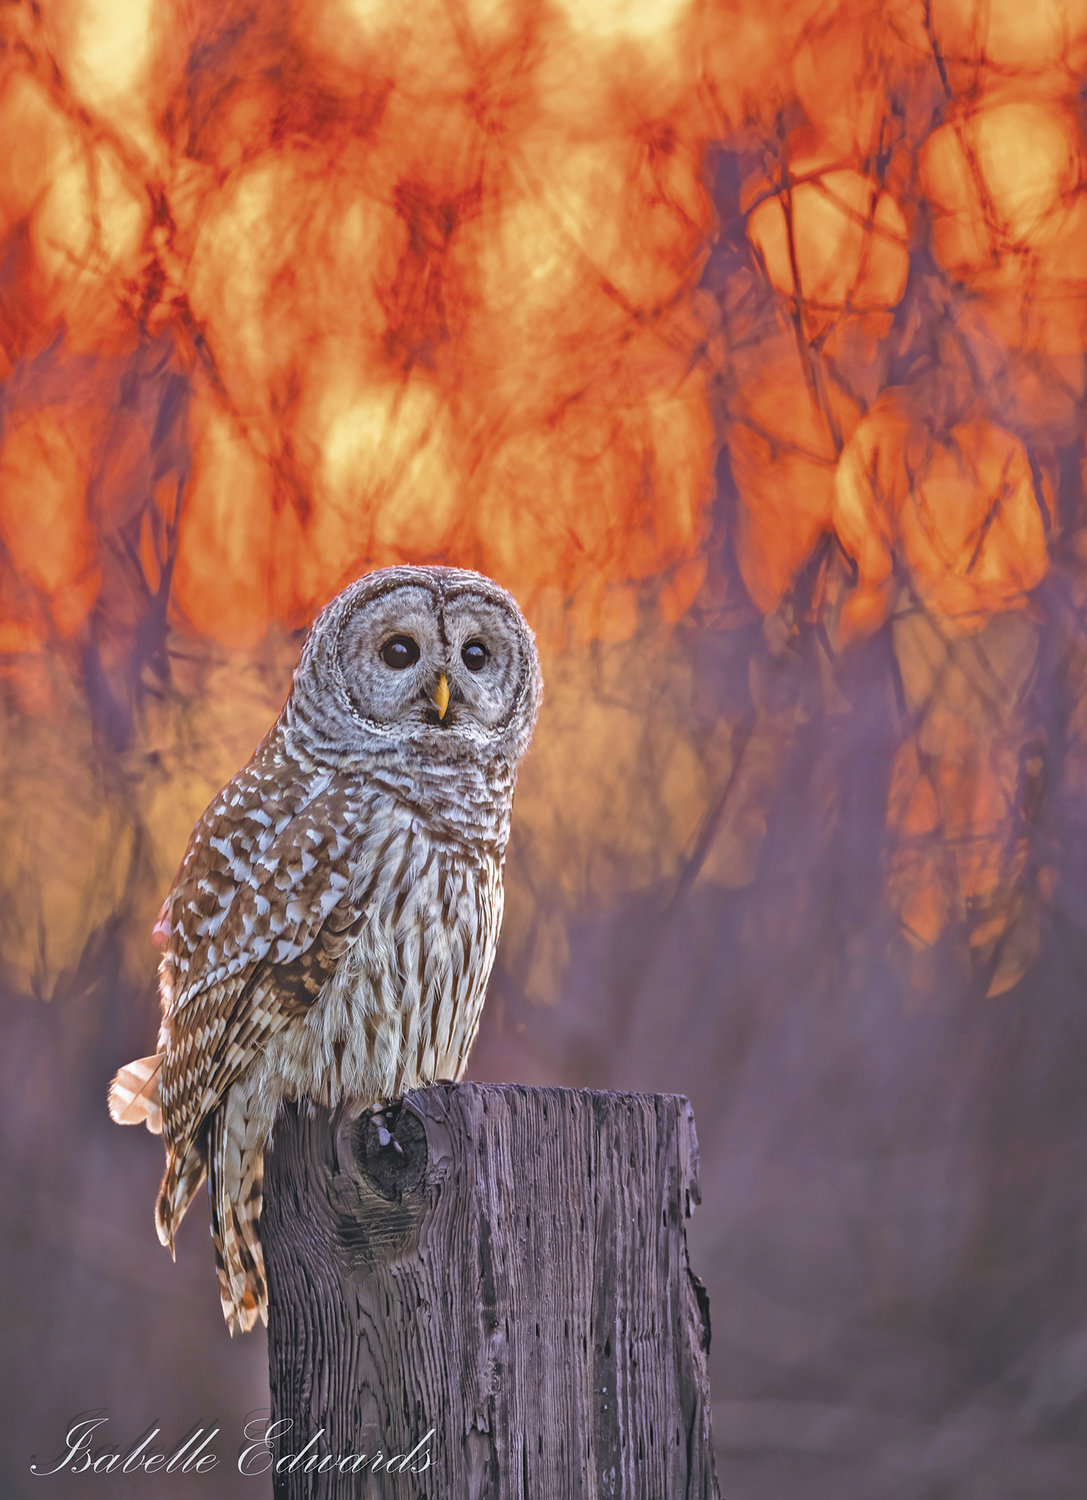 Barred owl at sunset.